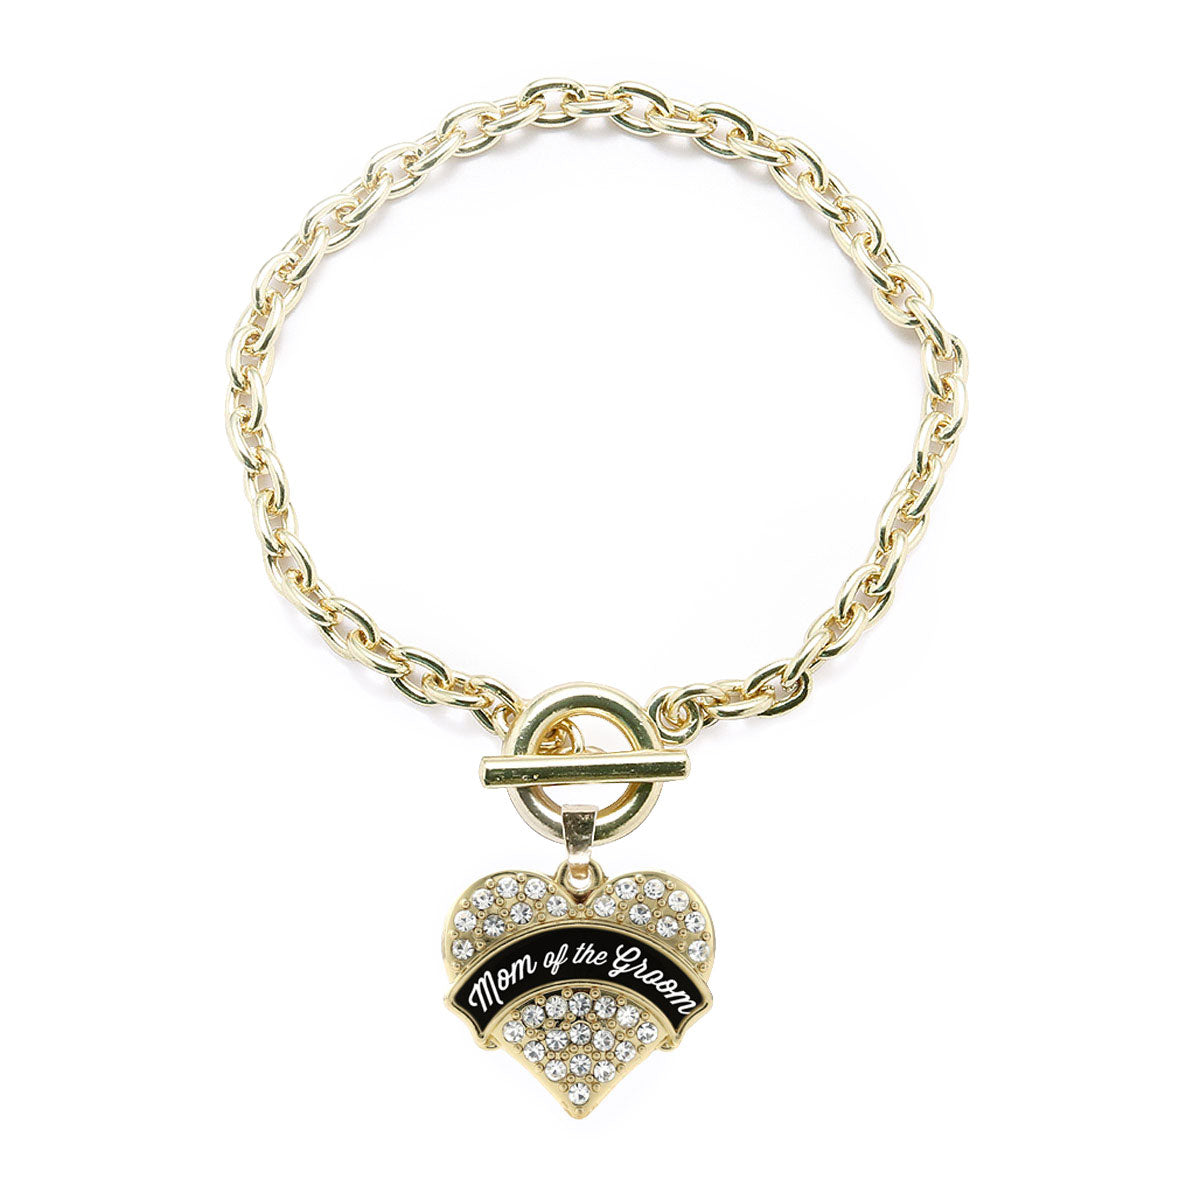 Gold Black and White Mom of the Groom Pave Heart Charm Toggle Bracelet